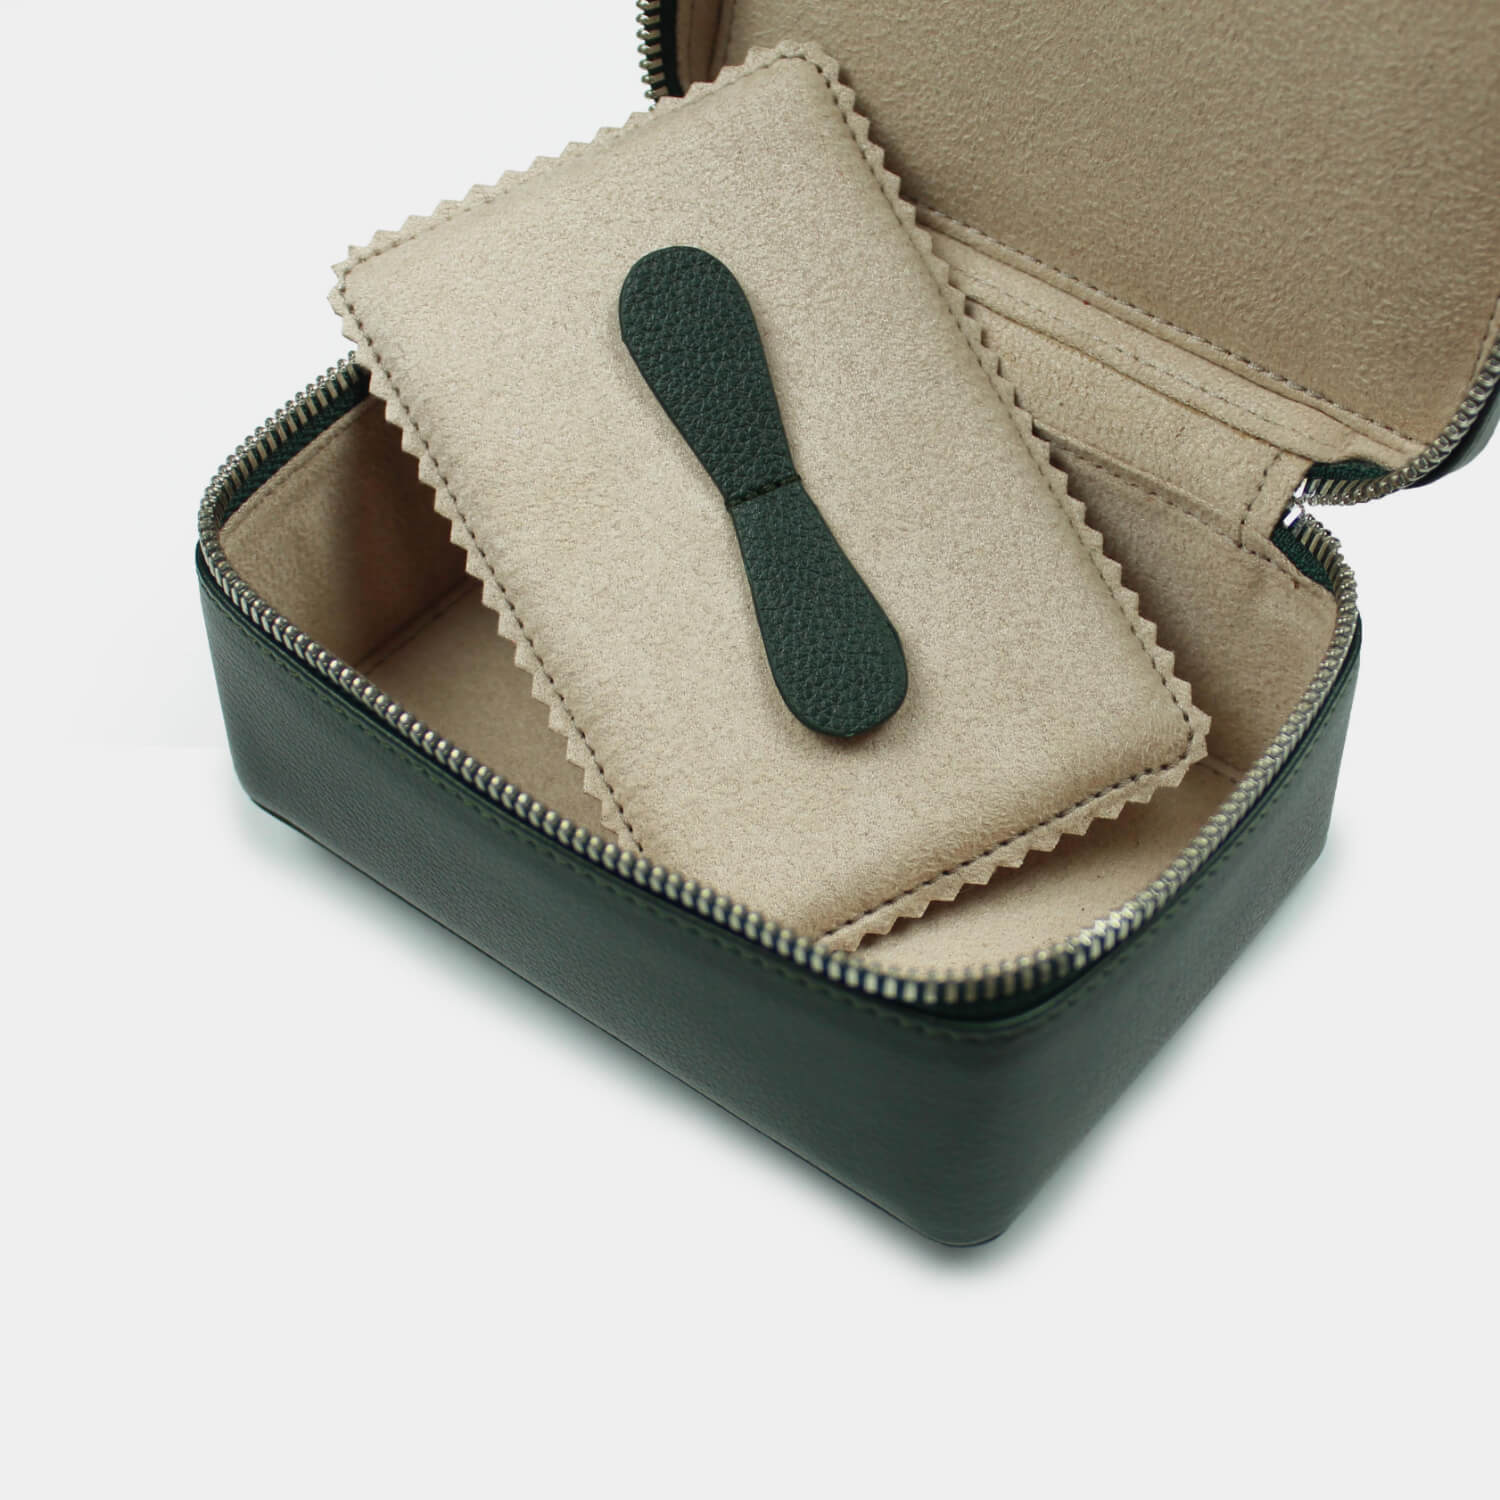 Fine grain leather medium rectangular jewellery case for valuables and cables, branded with your company logo